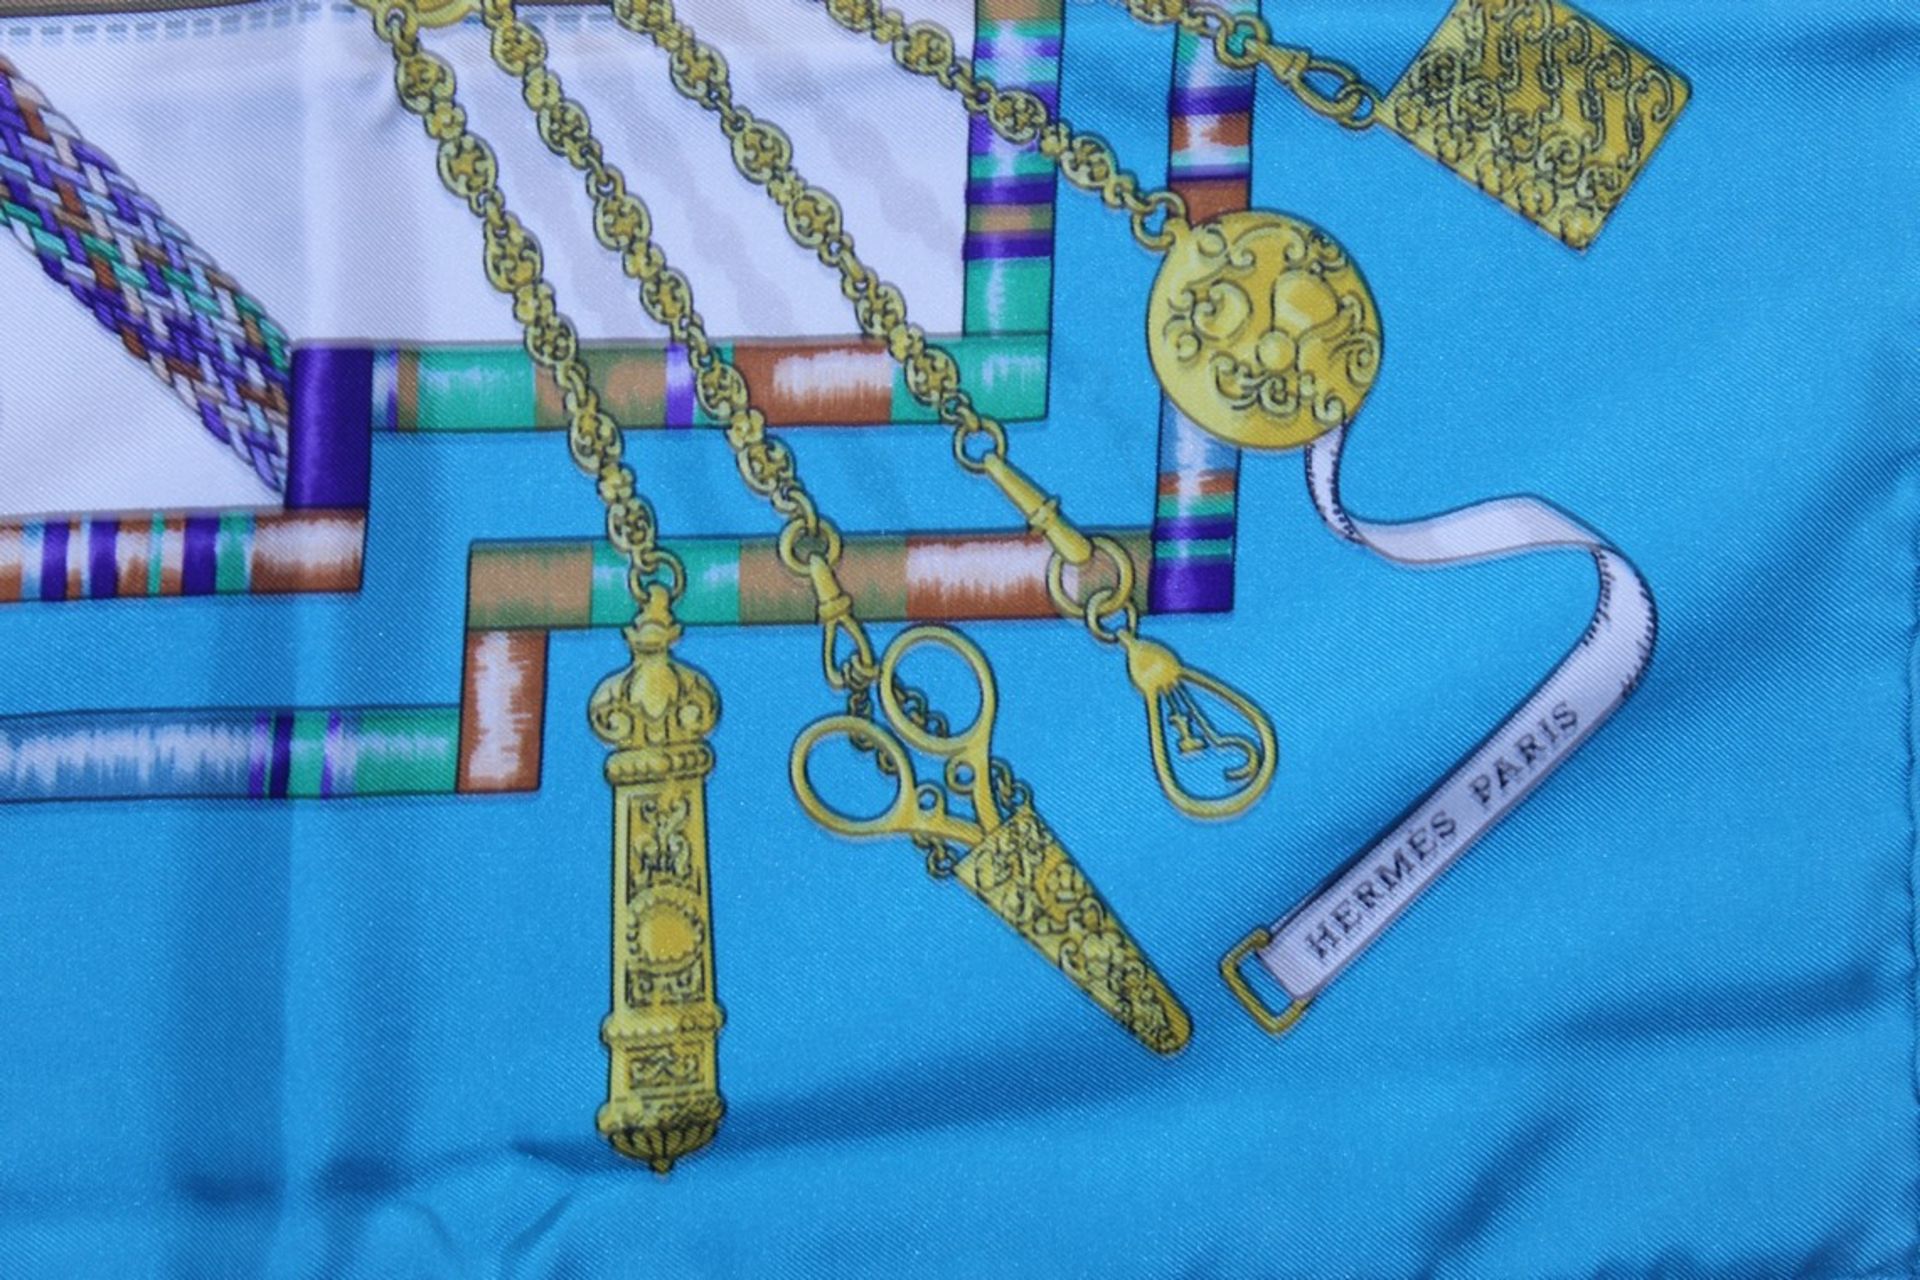 Rrp £580 Hermes 100% Twill Silk Light Blue/Violet Petite Main By Caty Latham 90X90Cm Luxury Scarf. - Image 2 of 5